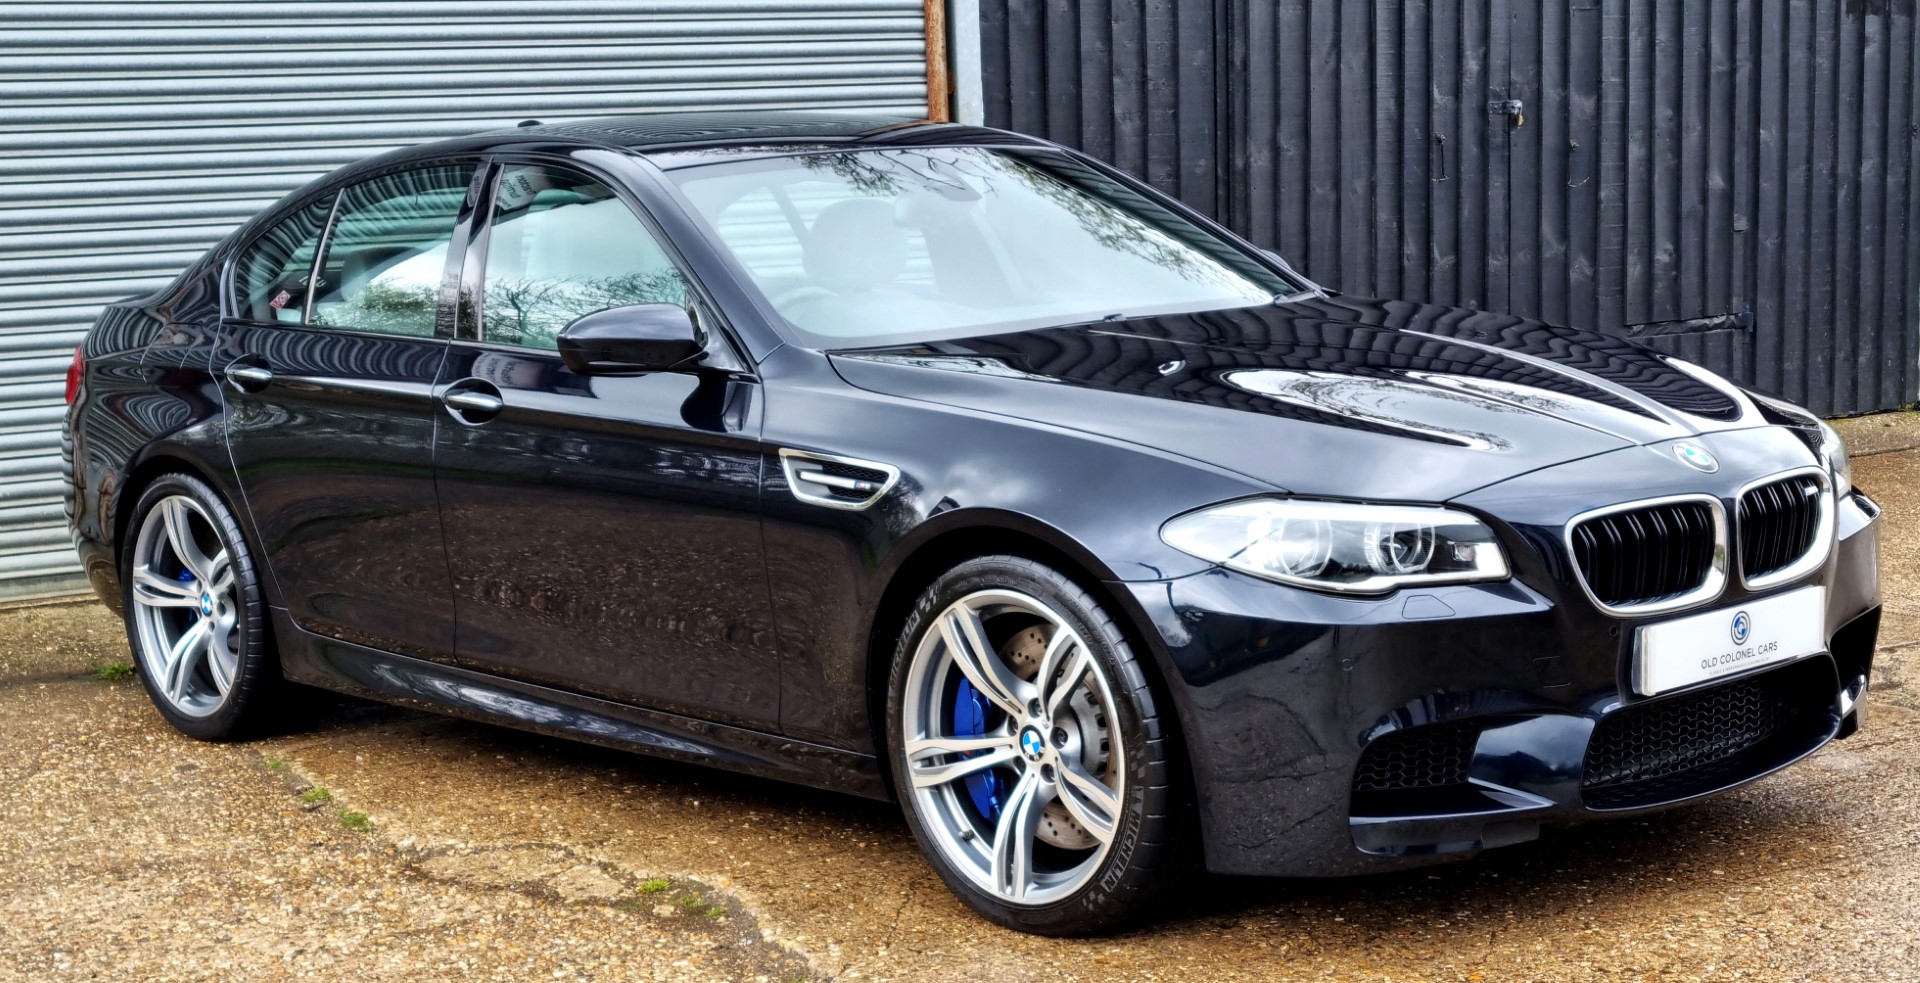 BMW F10 M5 LCI - 4.4 TWIN TURBO V8 - 7 SPEED DCT - Old Colonel